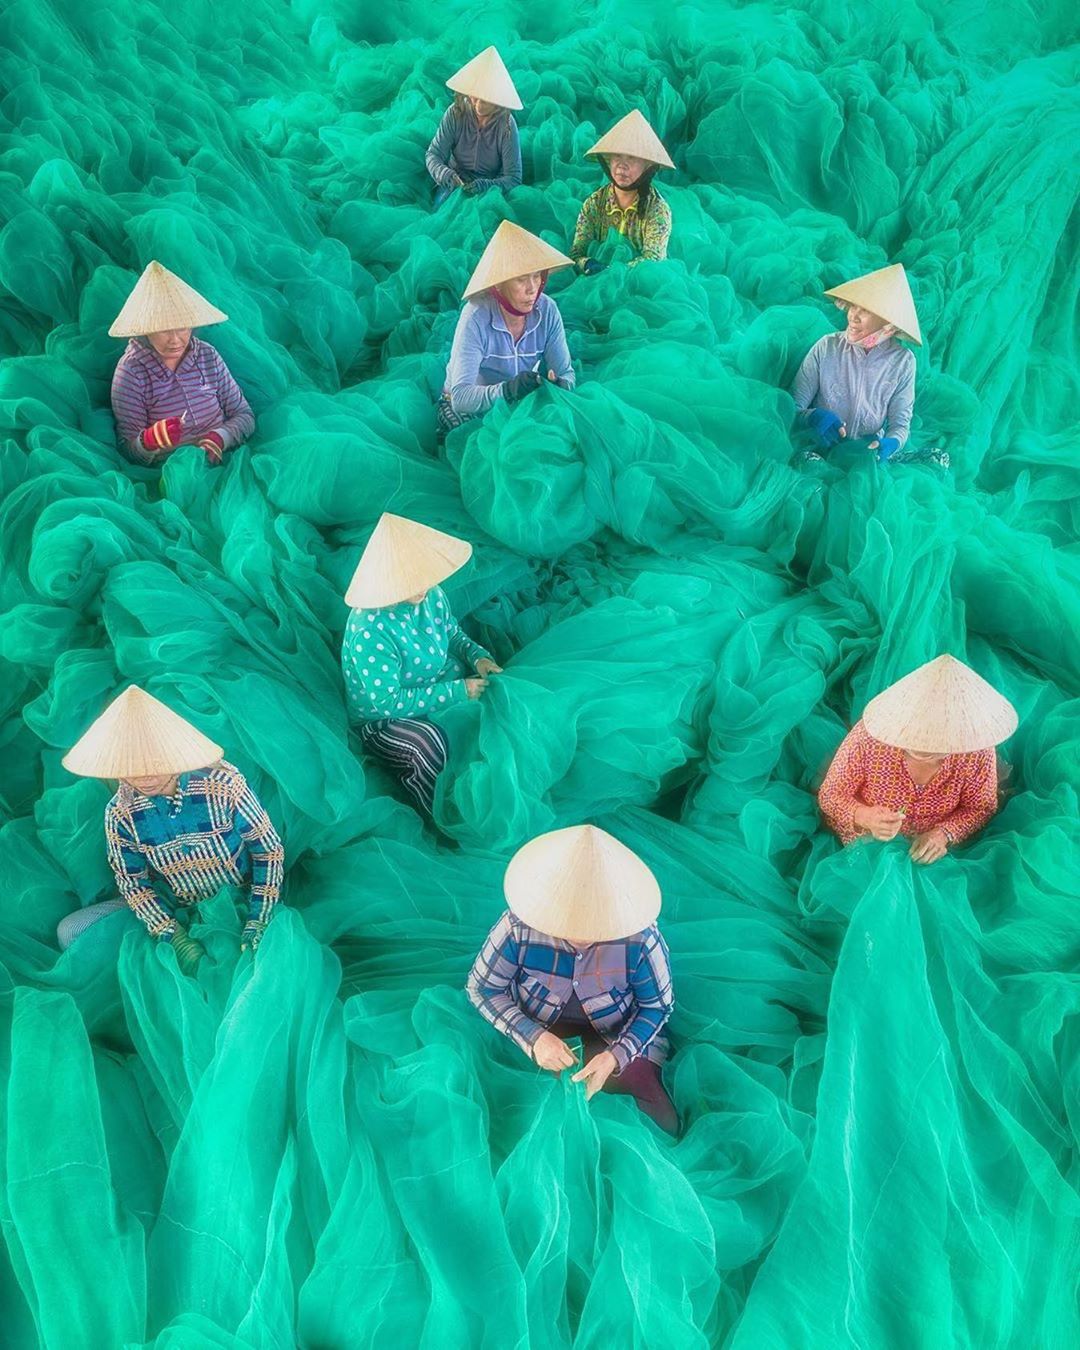 Today we're talking all about texture and design in the scope of wedding planning, and this vibrant teal fabric in Vietnam is the picture perfect example of why this design element makes all the difference in the world #fabricproduction #luxurywedding #weddingdesign // Willow & Oak Events